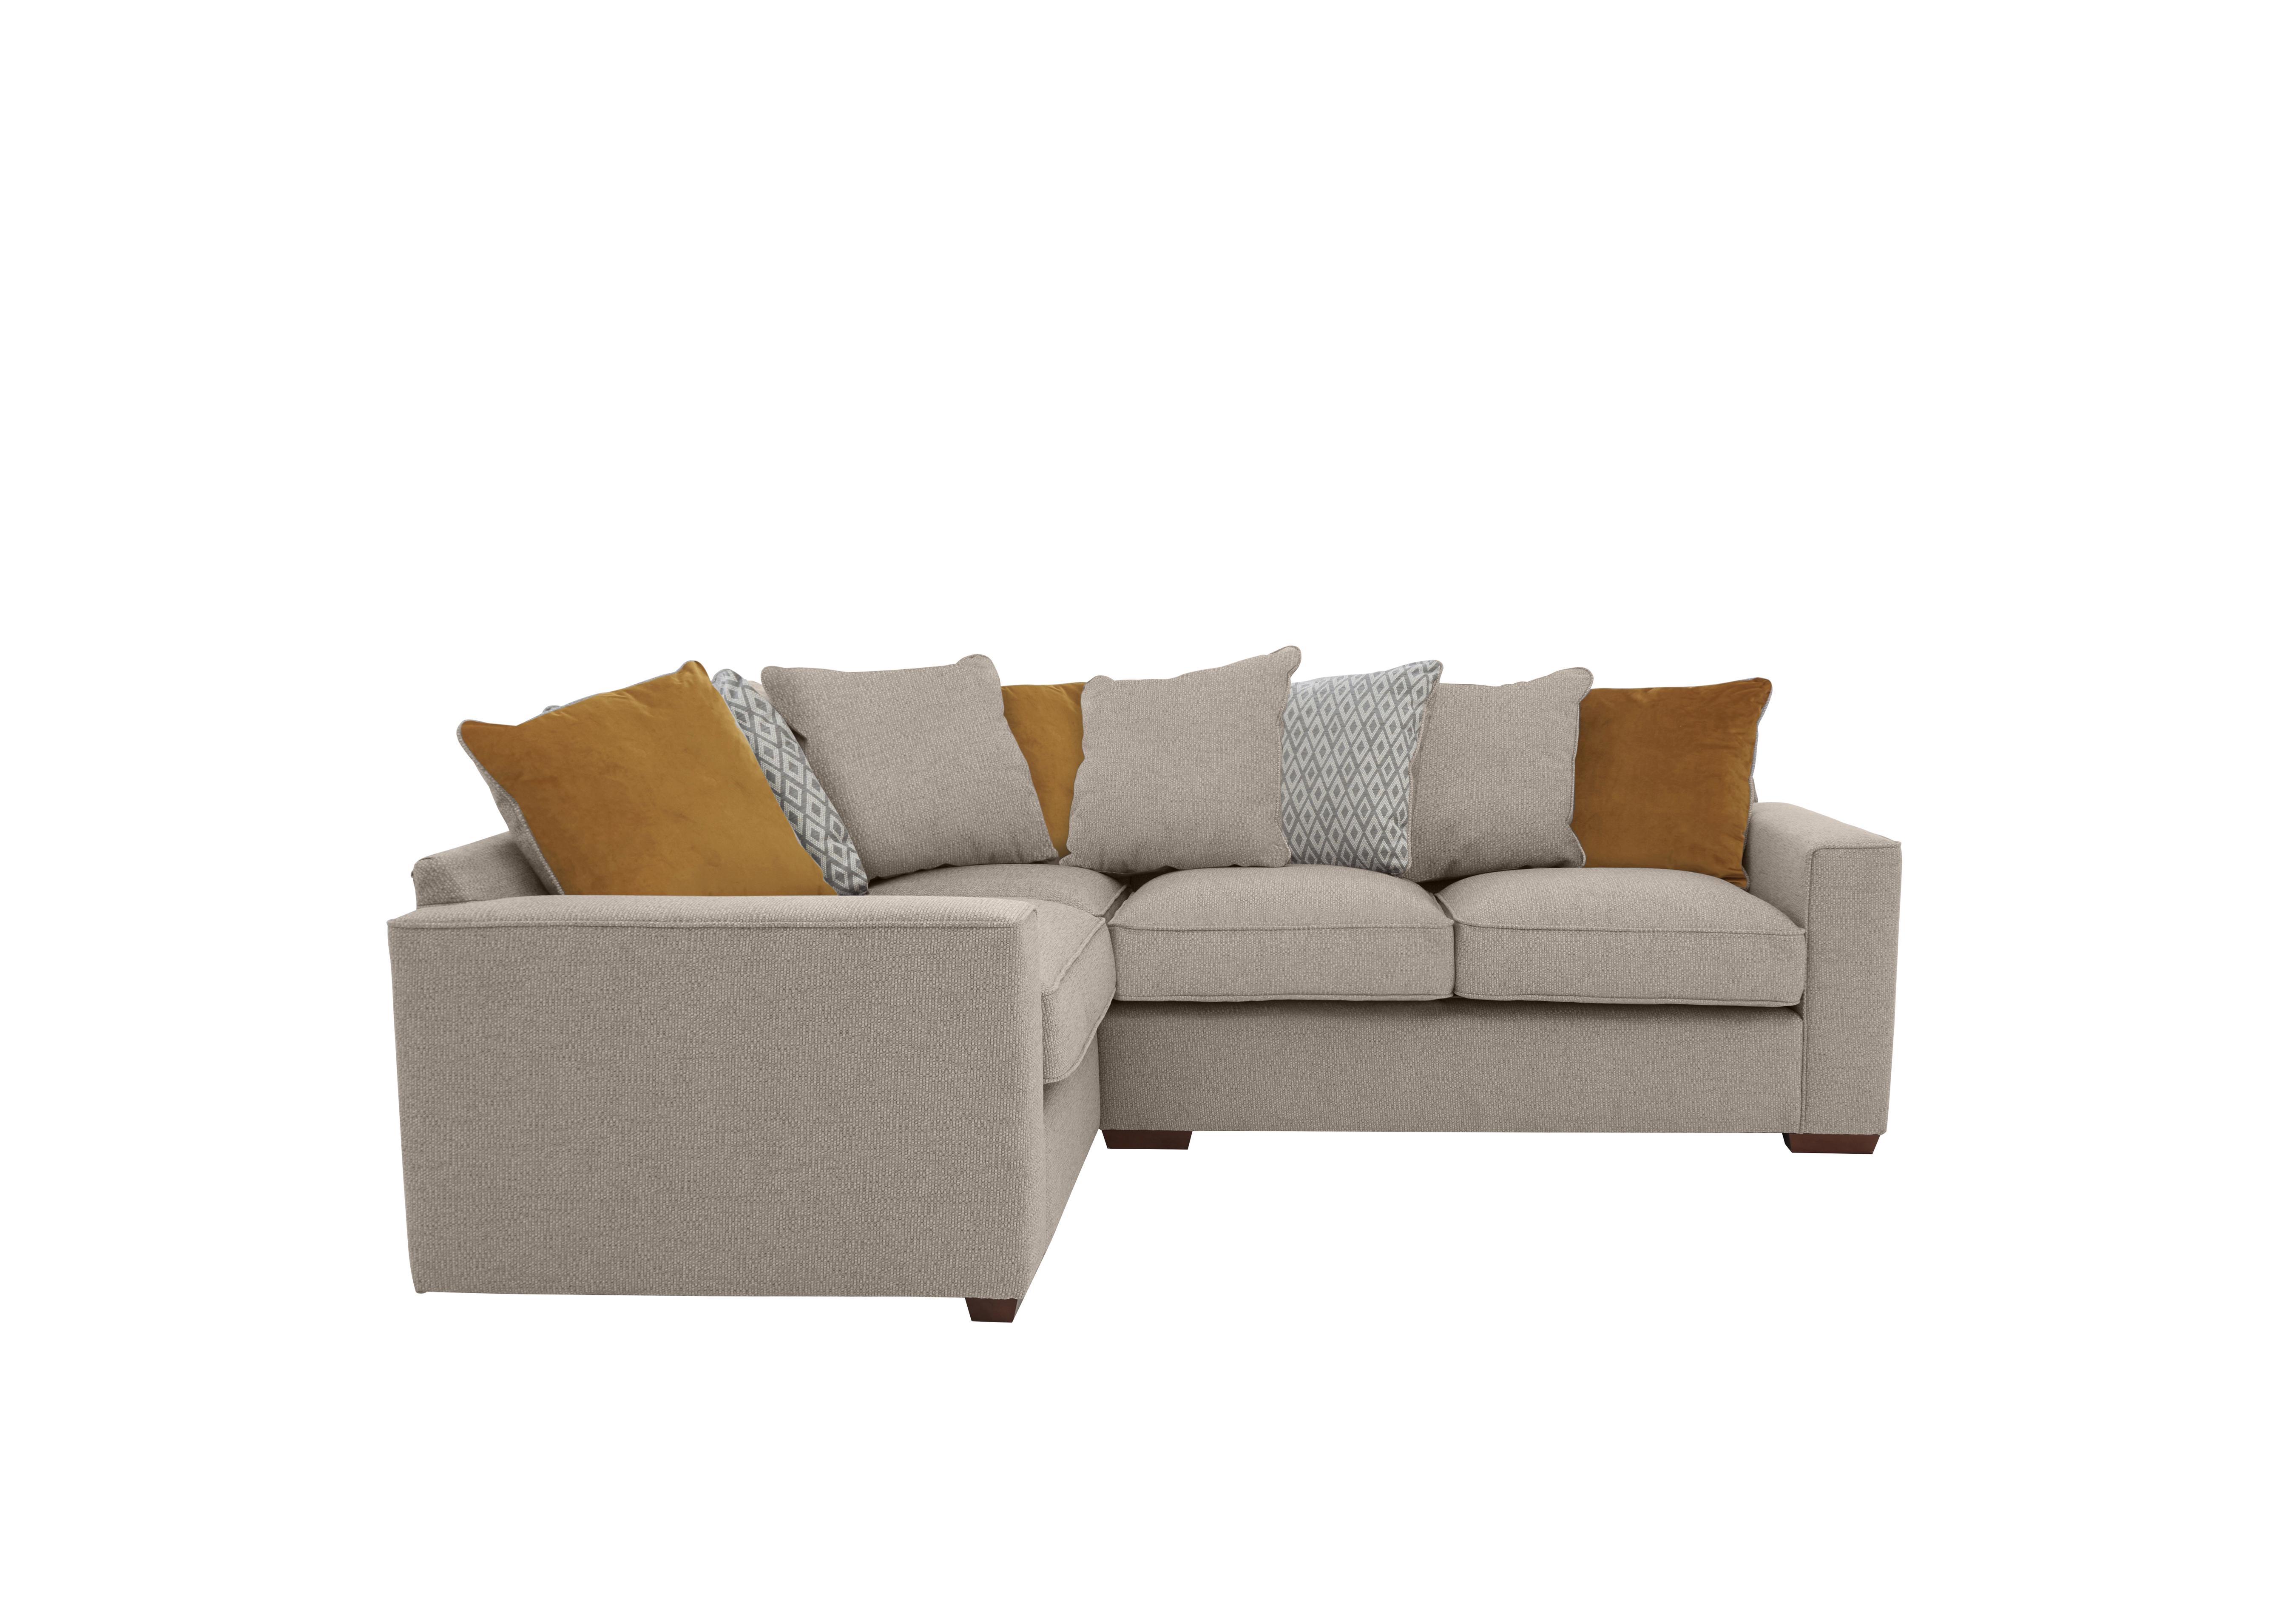 Cory Small Fabric Corner Scatter Back Sofa in Dallas Natural Mustard Pack on Furniture Village